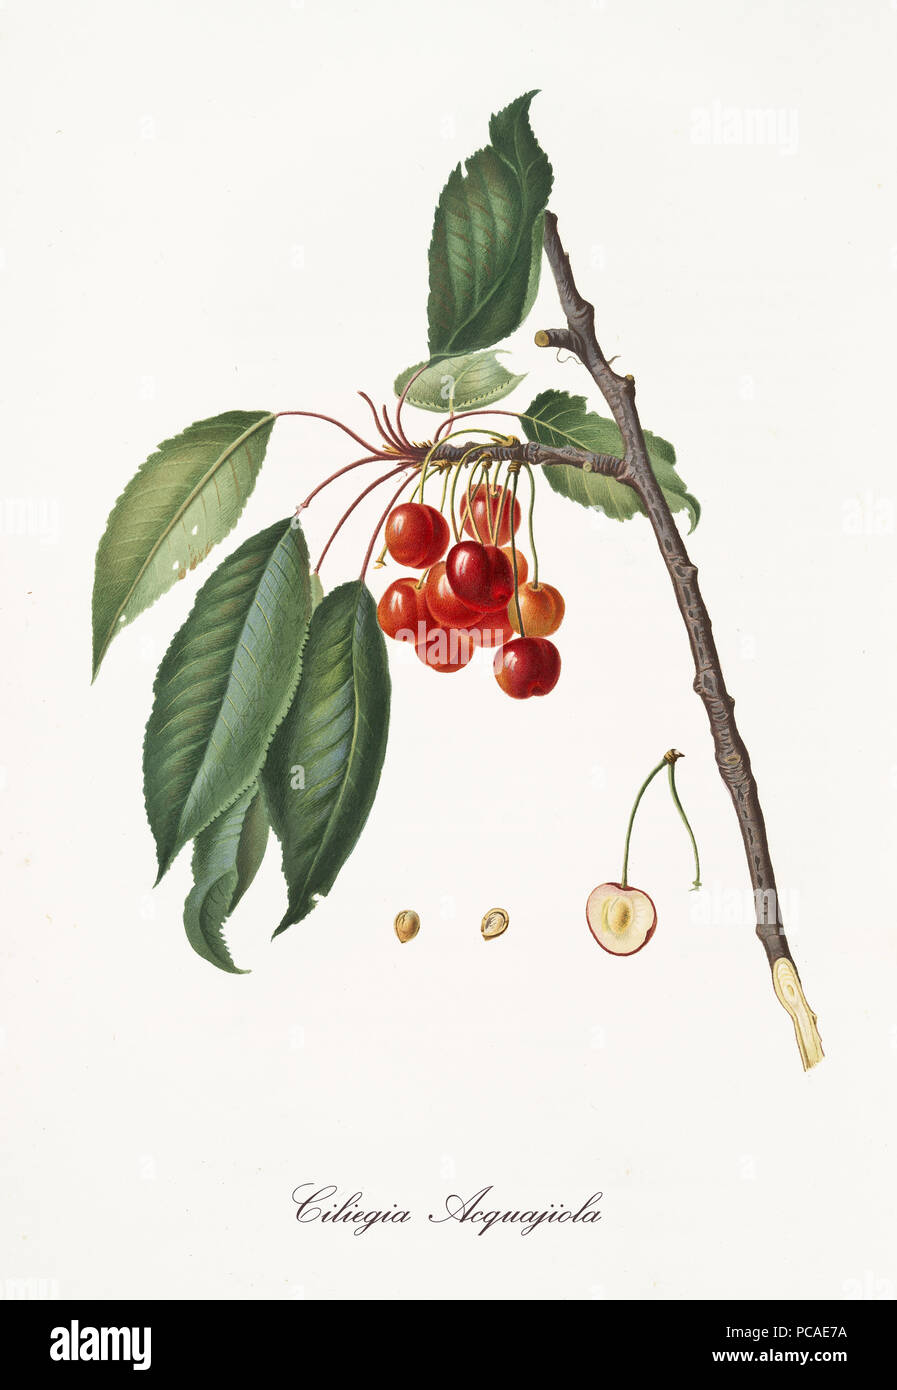 Red cherries hanging from their branch with leaves and section of the fruit. Elements isolated over white background. Old detailed botanical illustration by Giorgio Gallesio published in 1817, 1839 Stock Photo